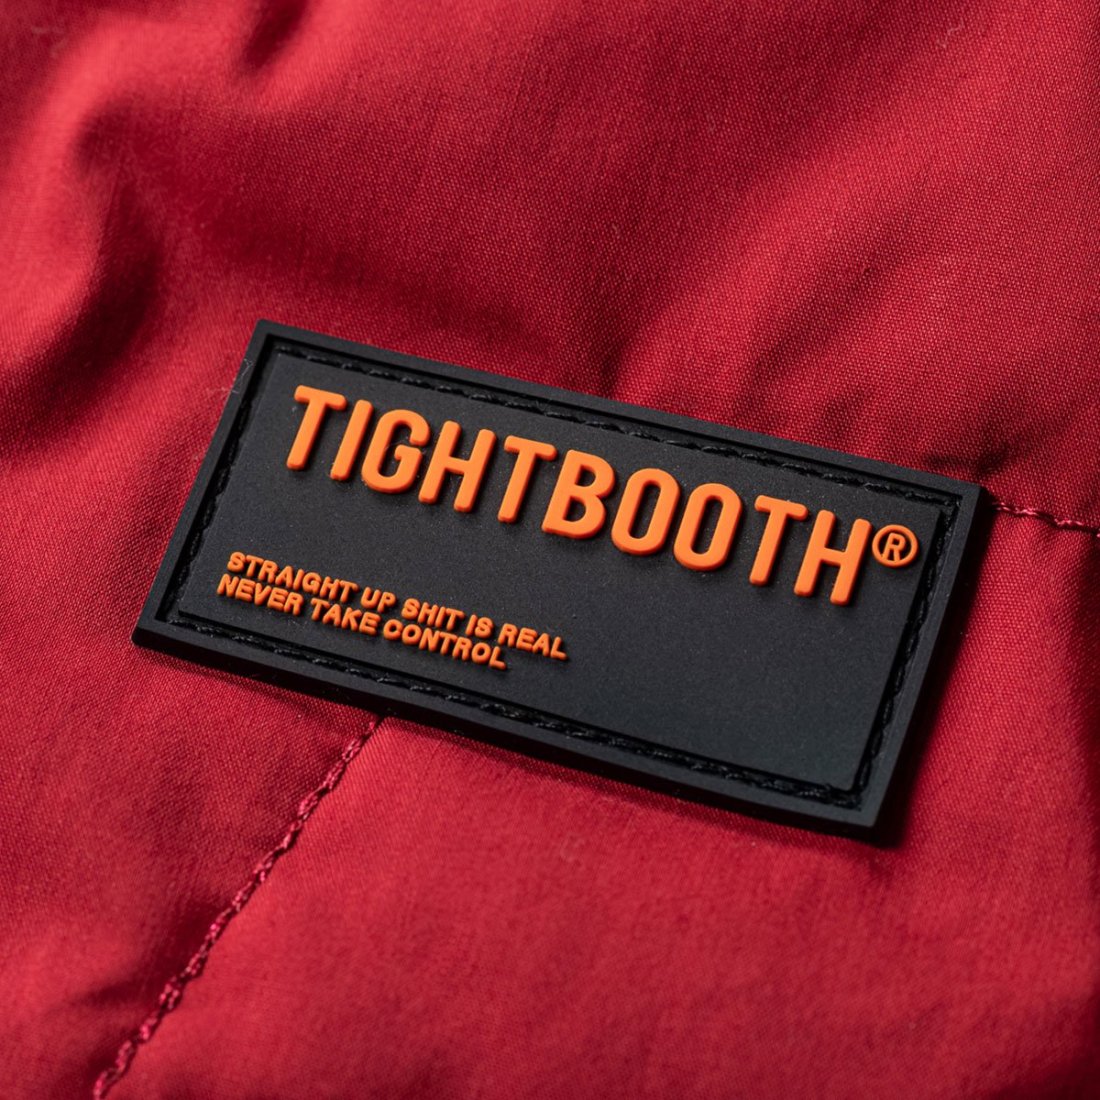 TIGHT BOOTH- T QUILTING JKT - STRANGLE